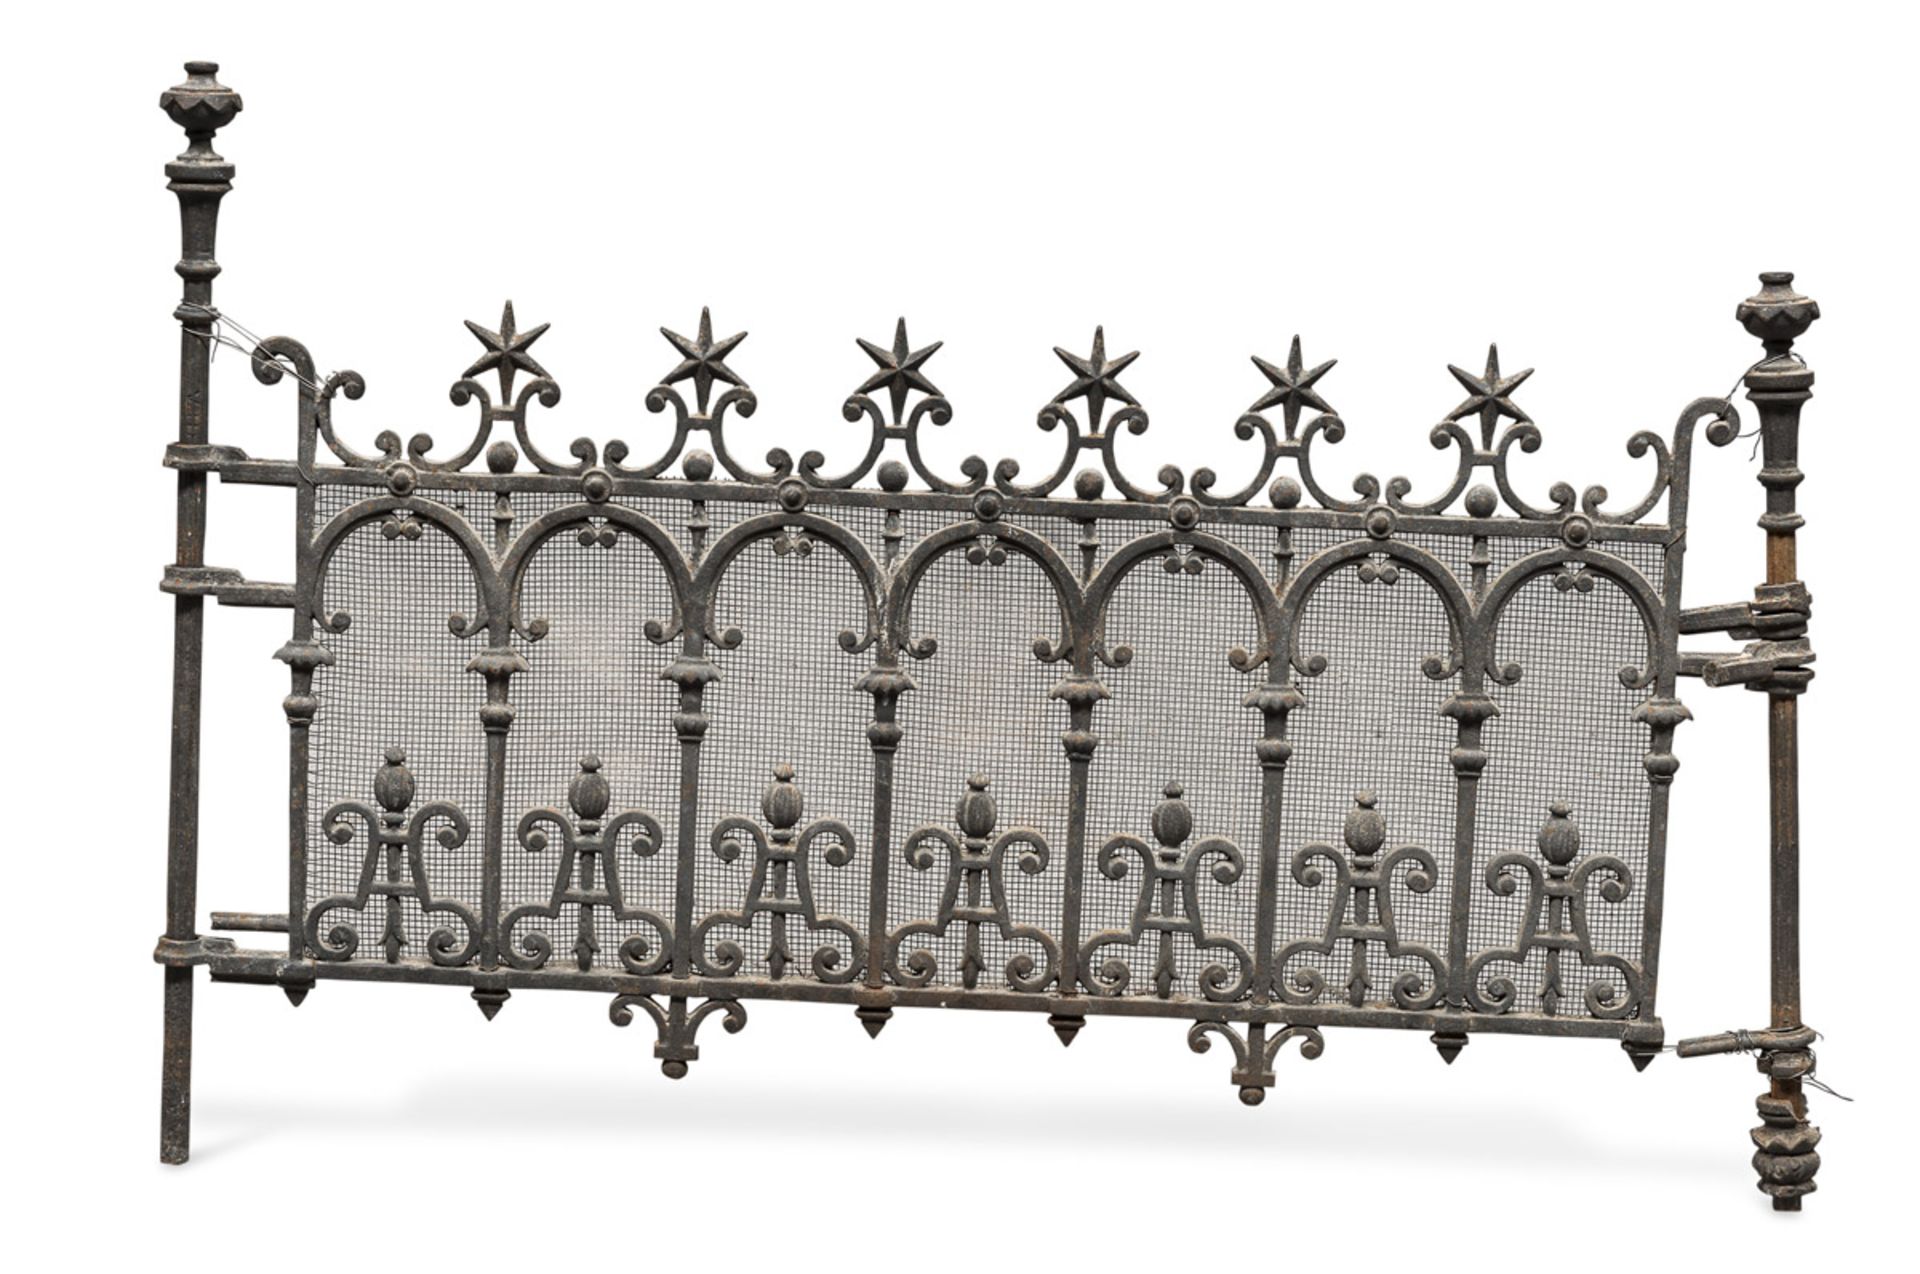 SMALL SHUTTER IN WROUGHT IRON - NORTHERN ITALY 18TH CENTURY